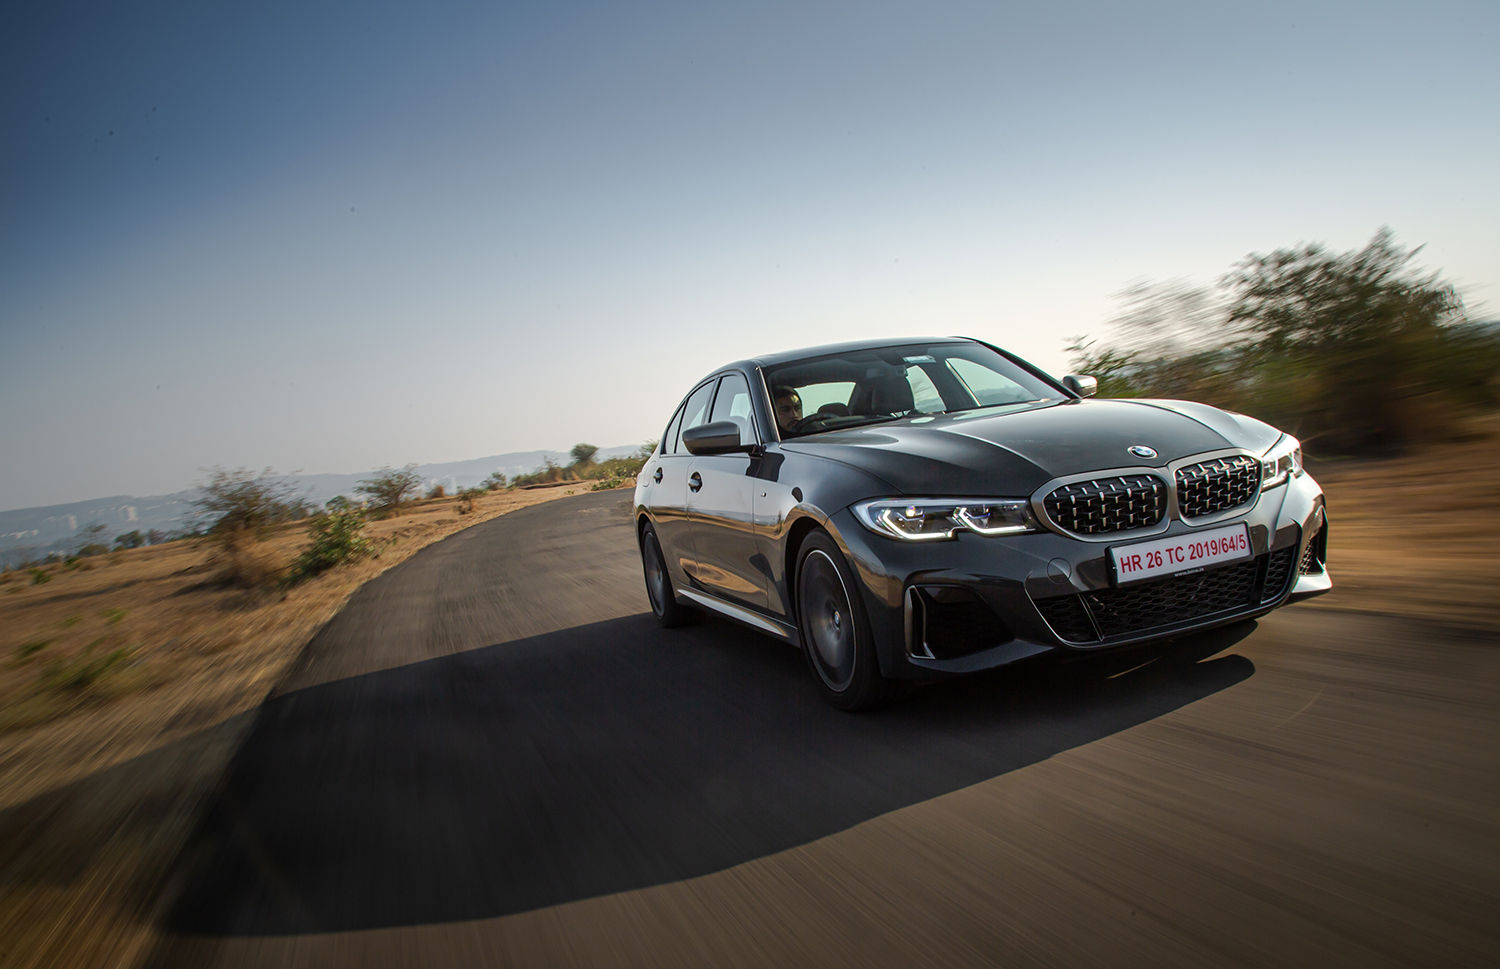 Bmw 3 Series Price In Mahbubnagar July 21 On Road Price Of 3 Series